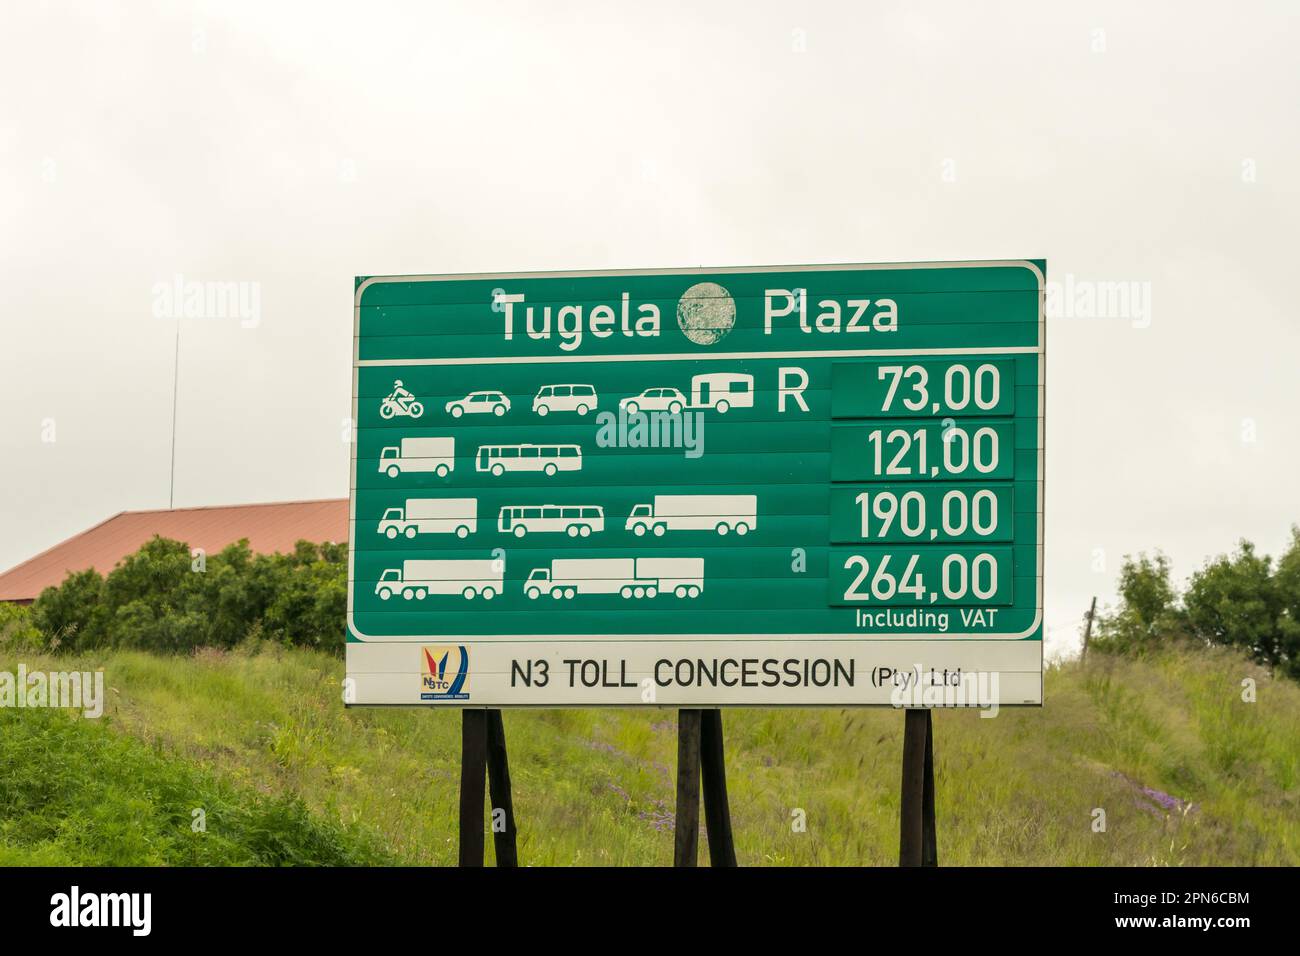 Tugela Plaza tariff board showing cost or charge per vehicle on toll road or N3 highway in South Africa Stock Photo